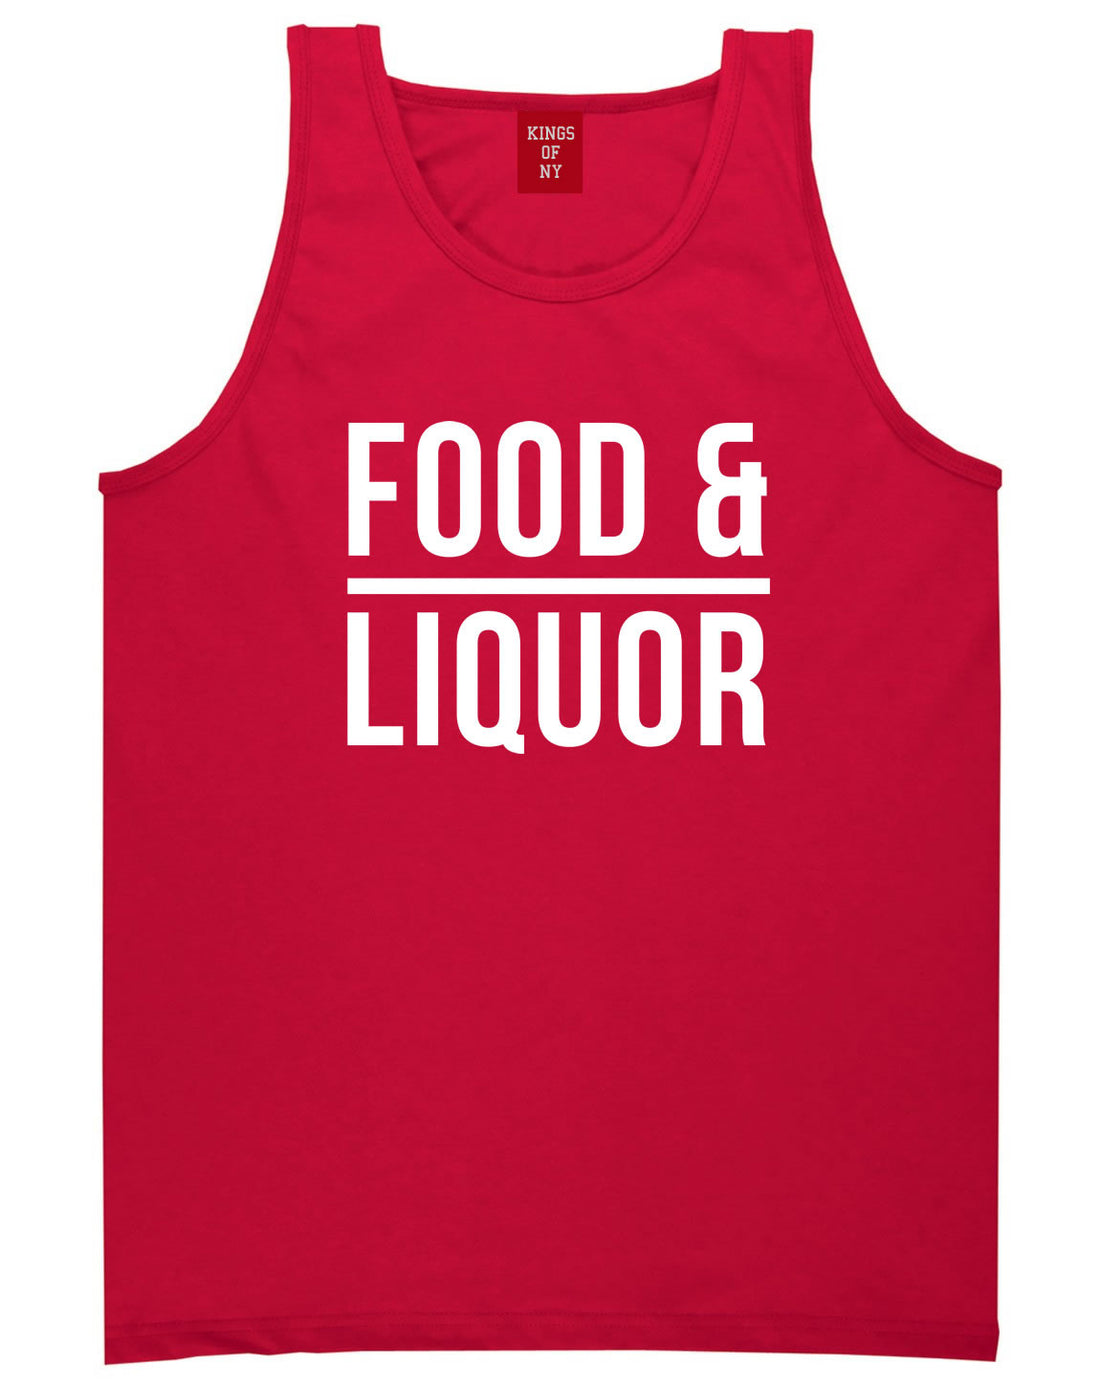 Food And Liquor Tank Top in Red By Kings Of NY